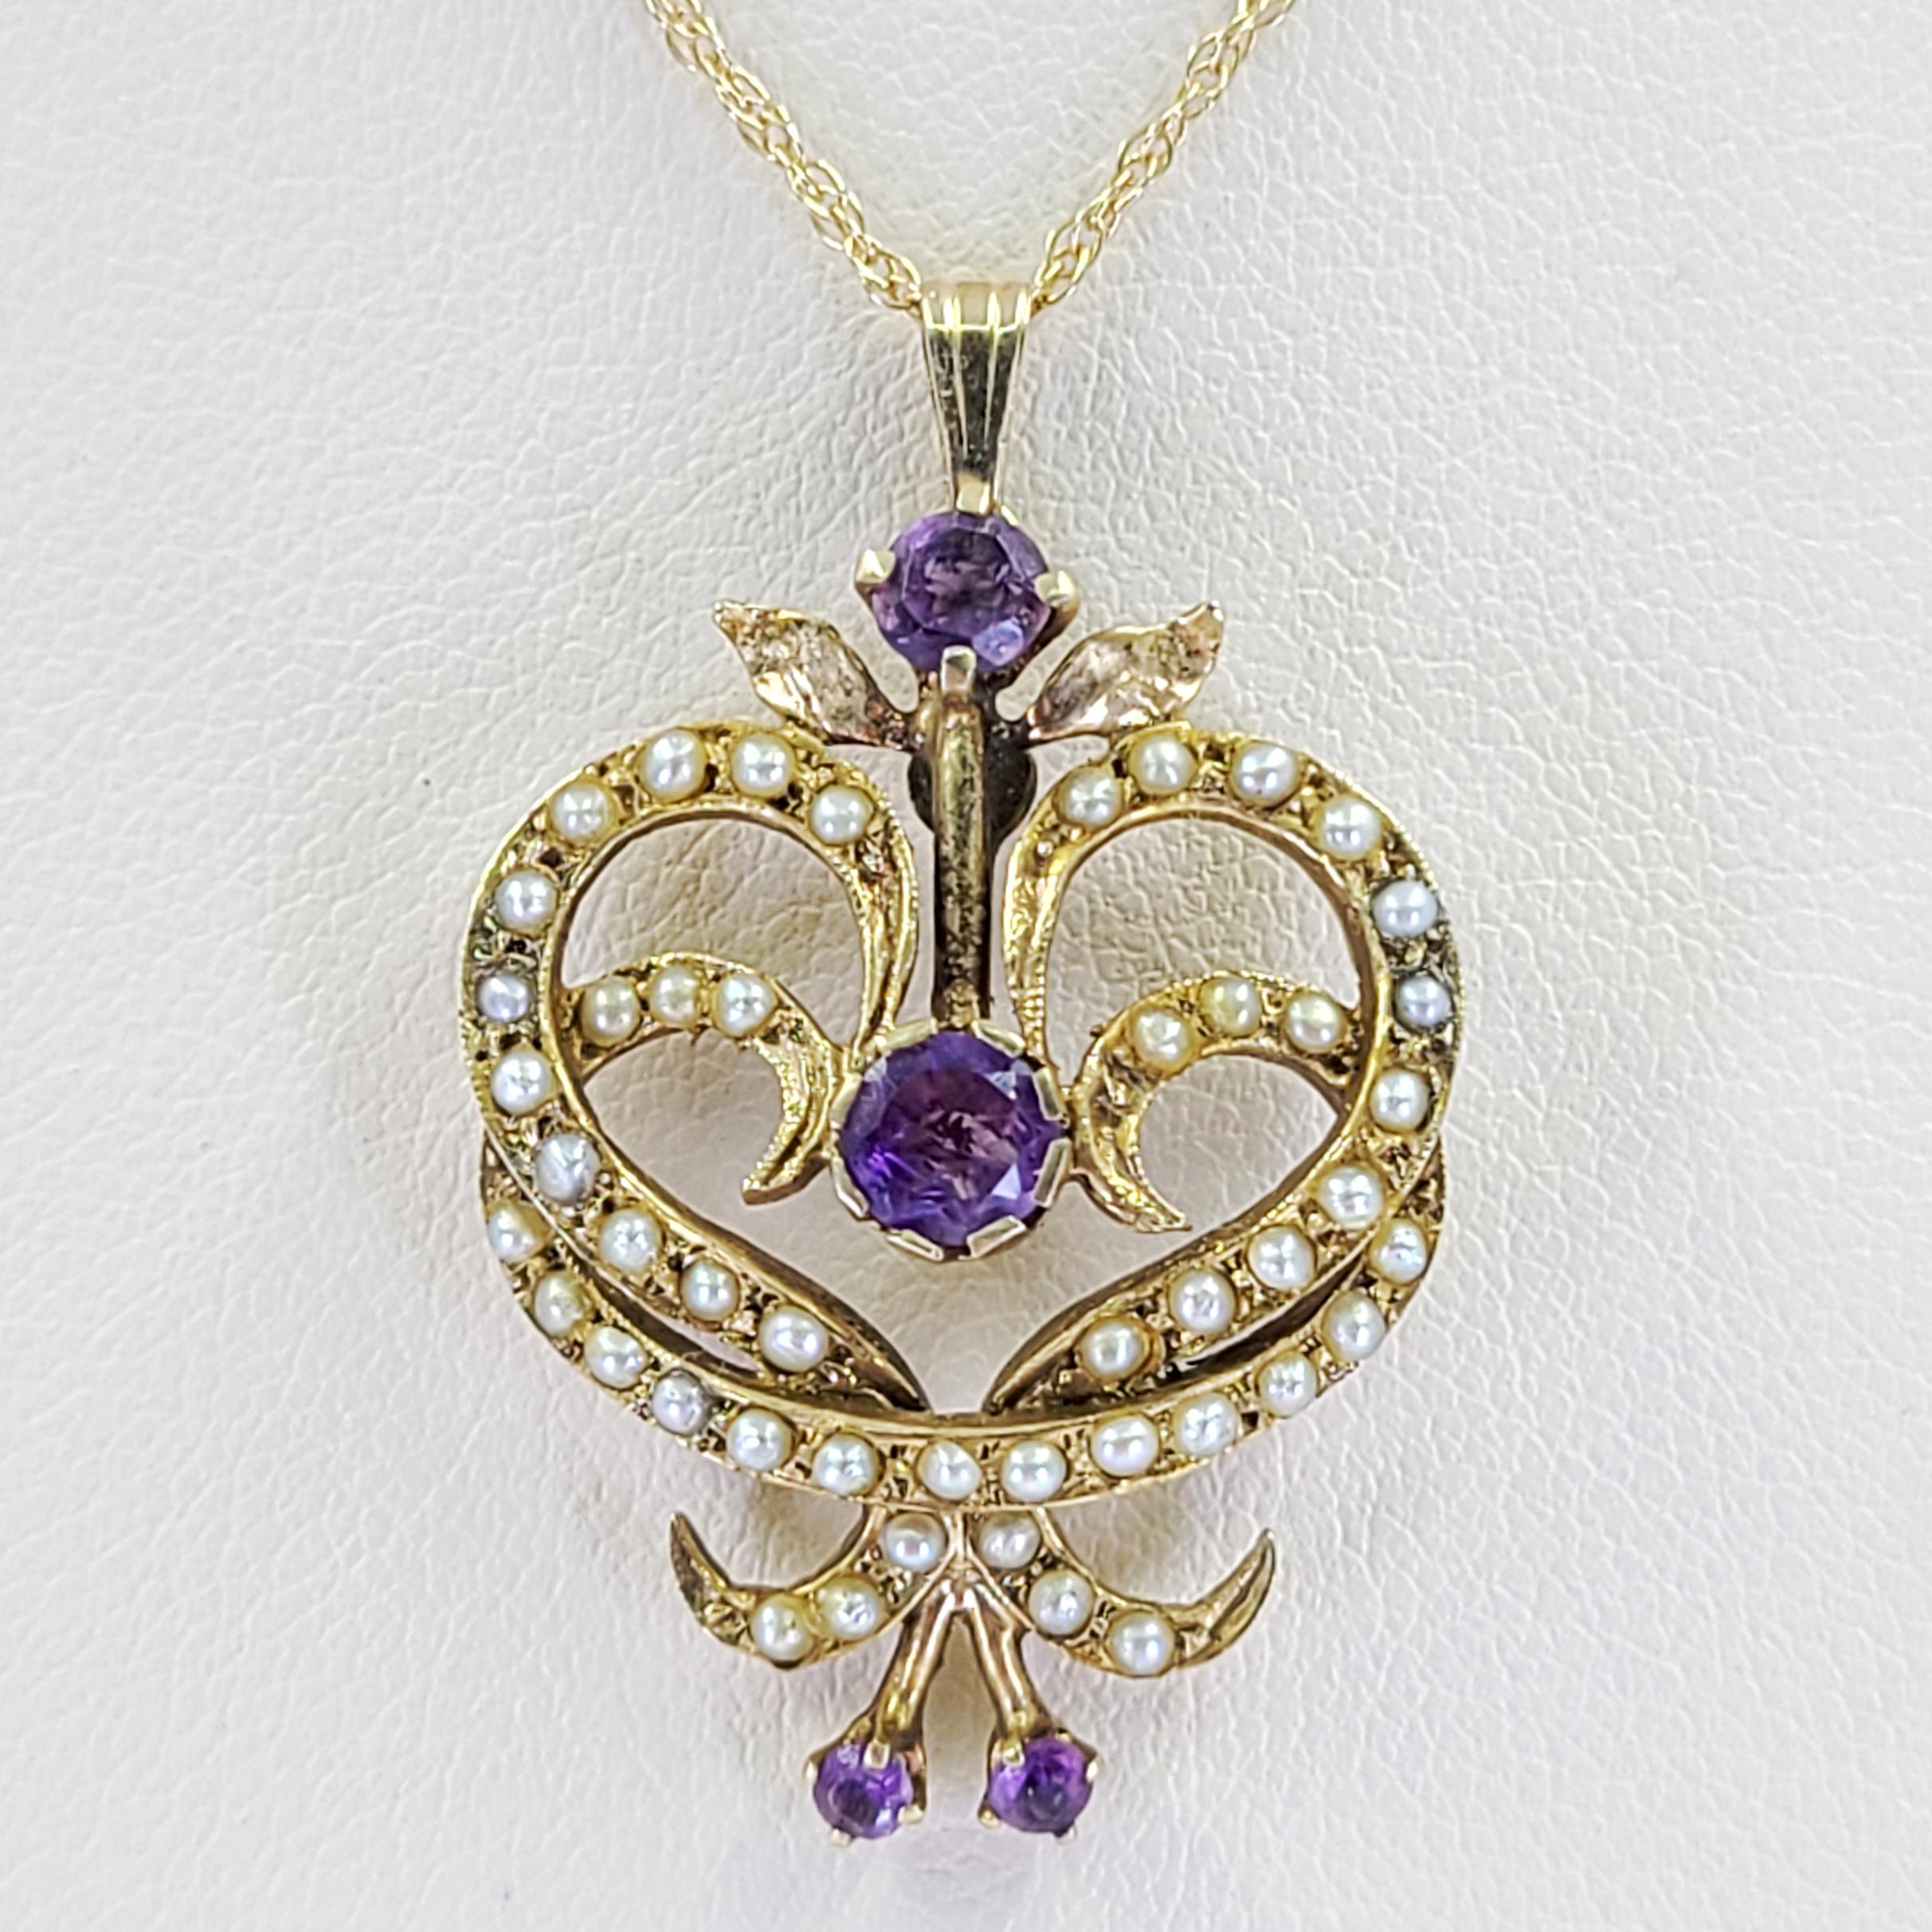 14 Karat Yellow Gold Art Nouveau Pendant Necklace Featuring Seed Pearls and 4 Round Amethysts. 18 Inch Chain With 1.5 Inch Pendant. Finished Weight Is 3.3 Grams.